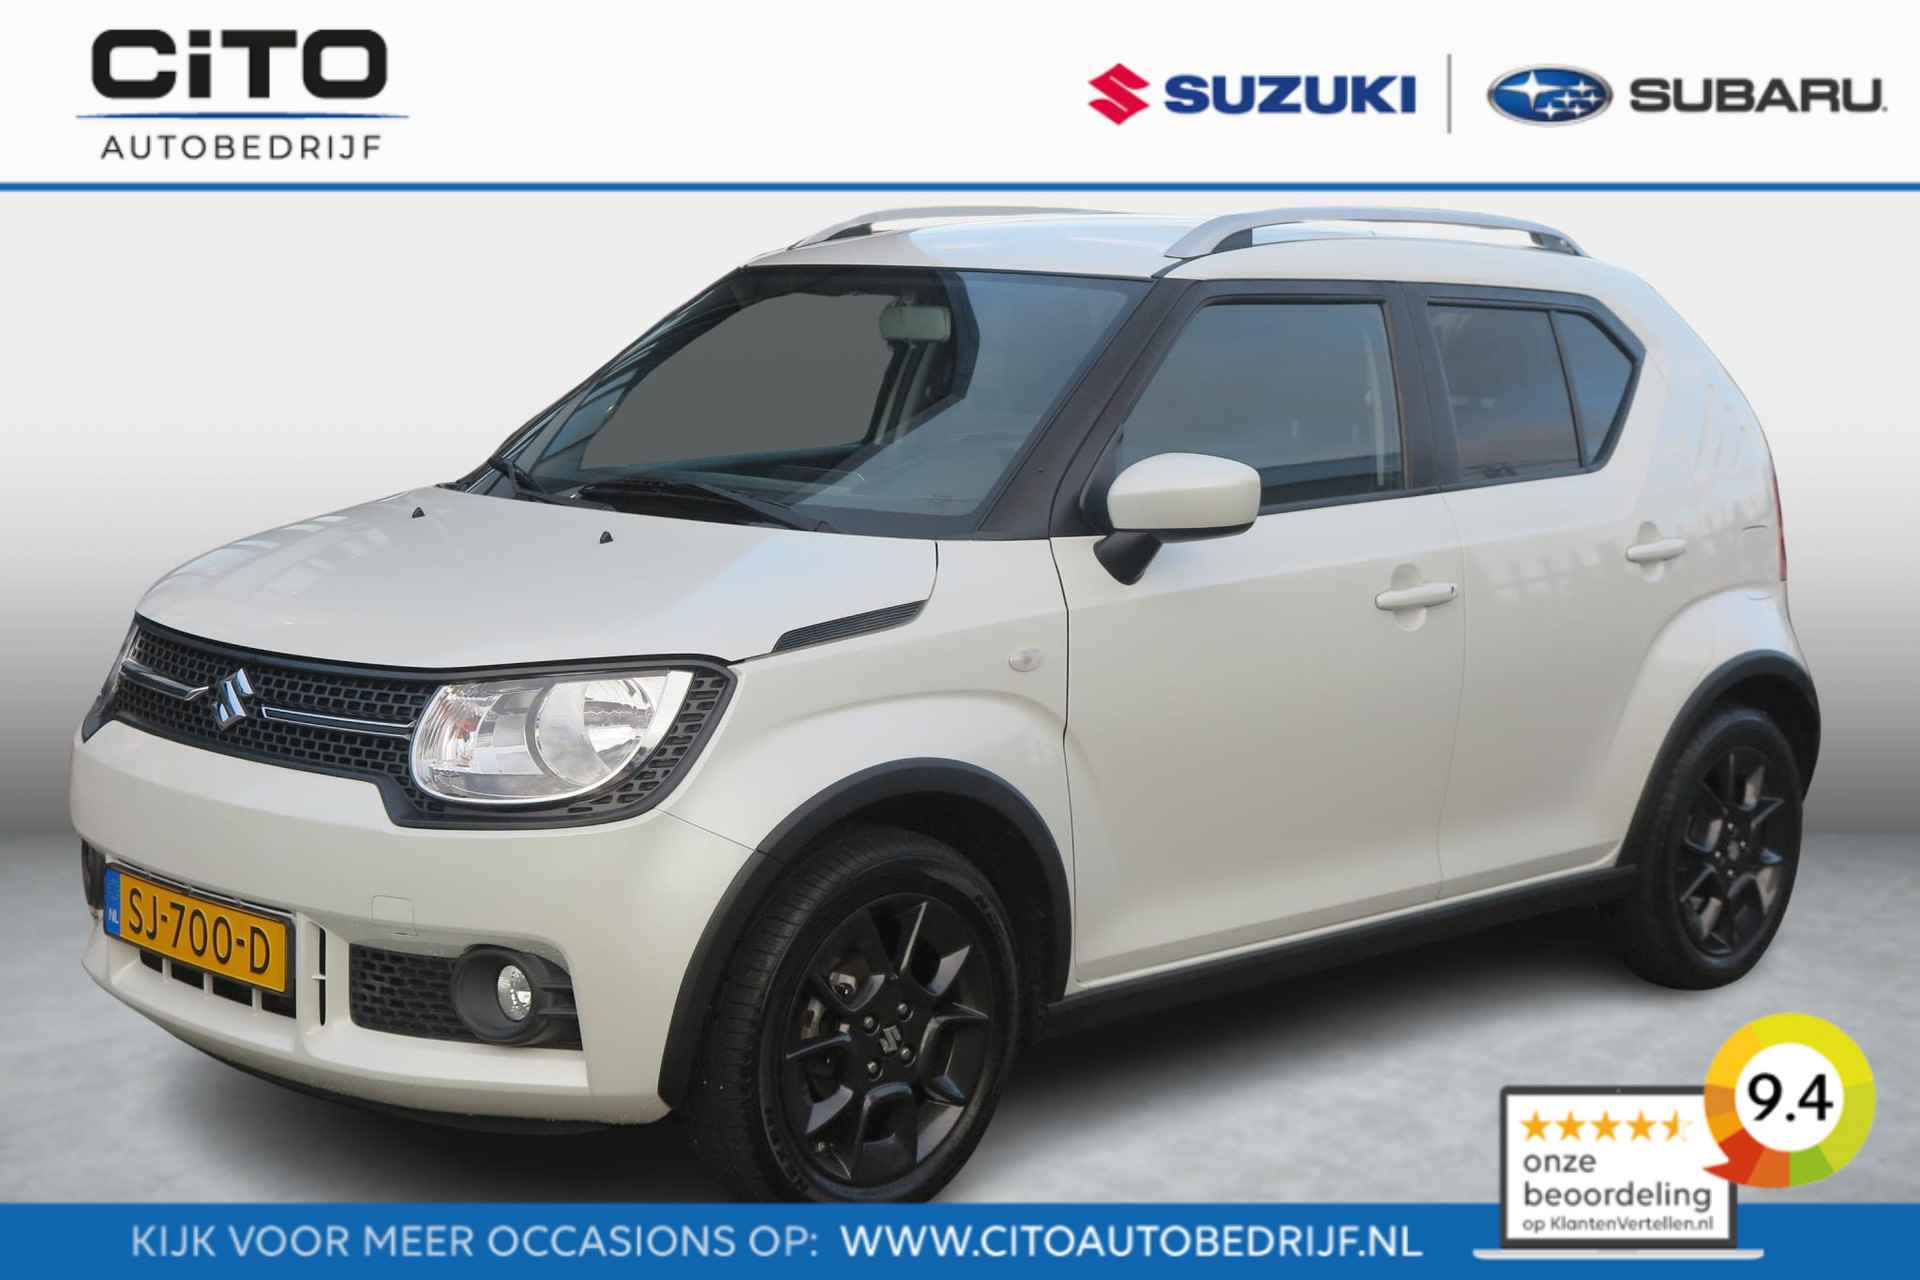 Suzuki Ignis 1.2 Select Lage Km stand| Luxe uitvoering| Airco - 1/25